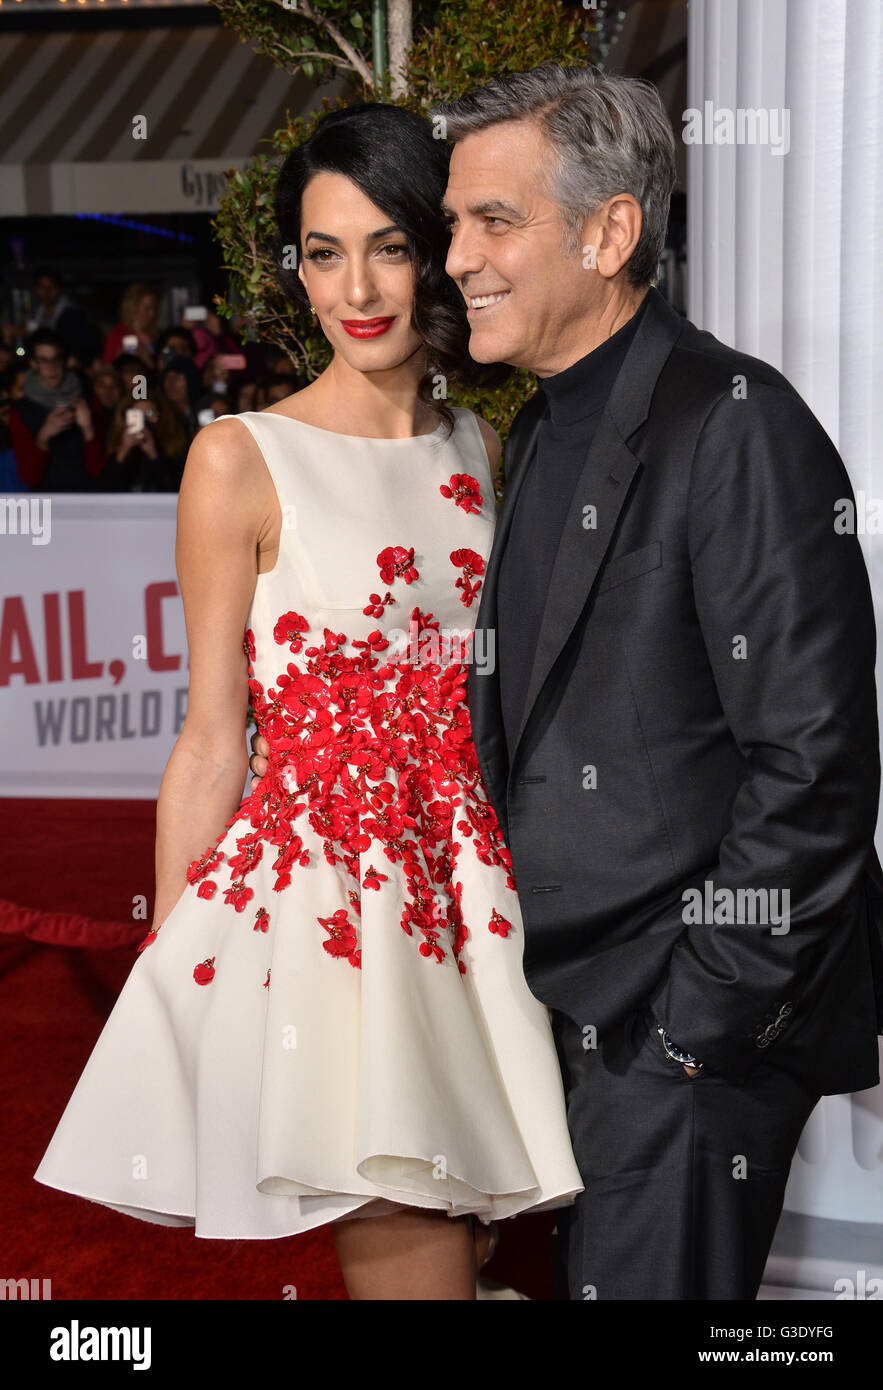 LOS ANGELES, CA - FEBRUARY 1, 2016: Actor George Clooney & wife Amal Clooney at the world premiere of his movie 'Hail Caesar!' at the Regency Village Theatre, Westwood. Stock Photo